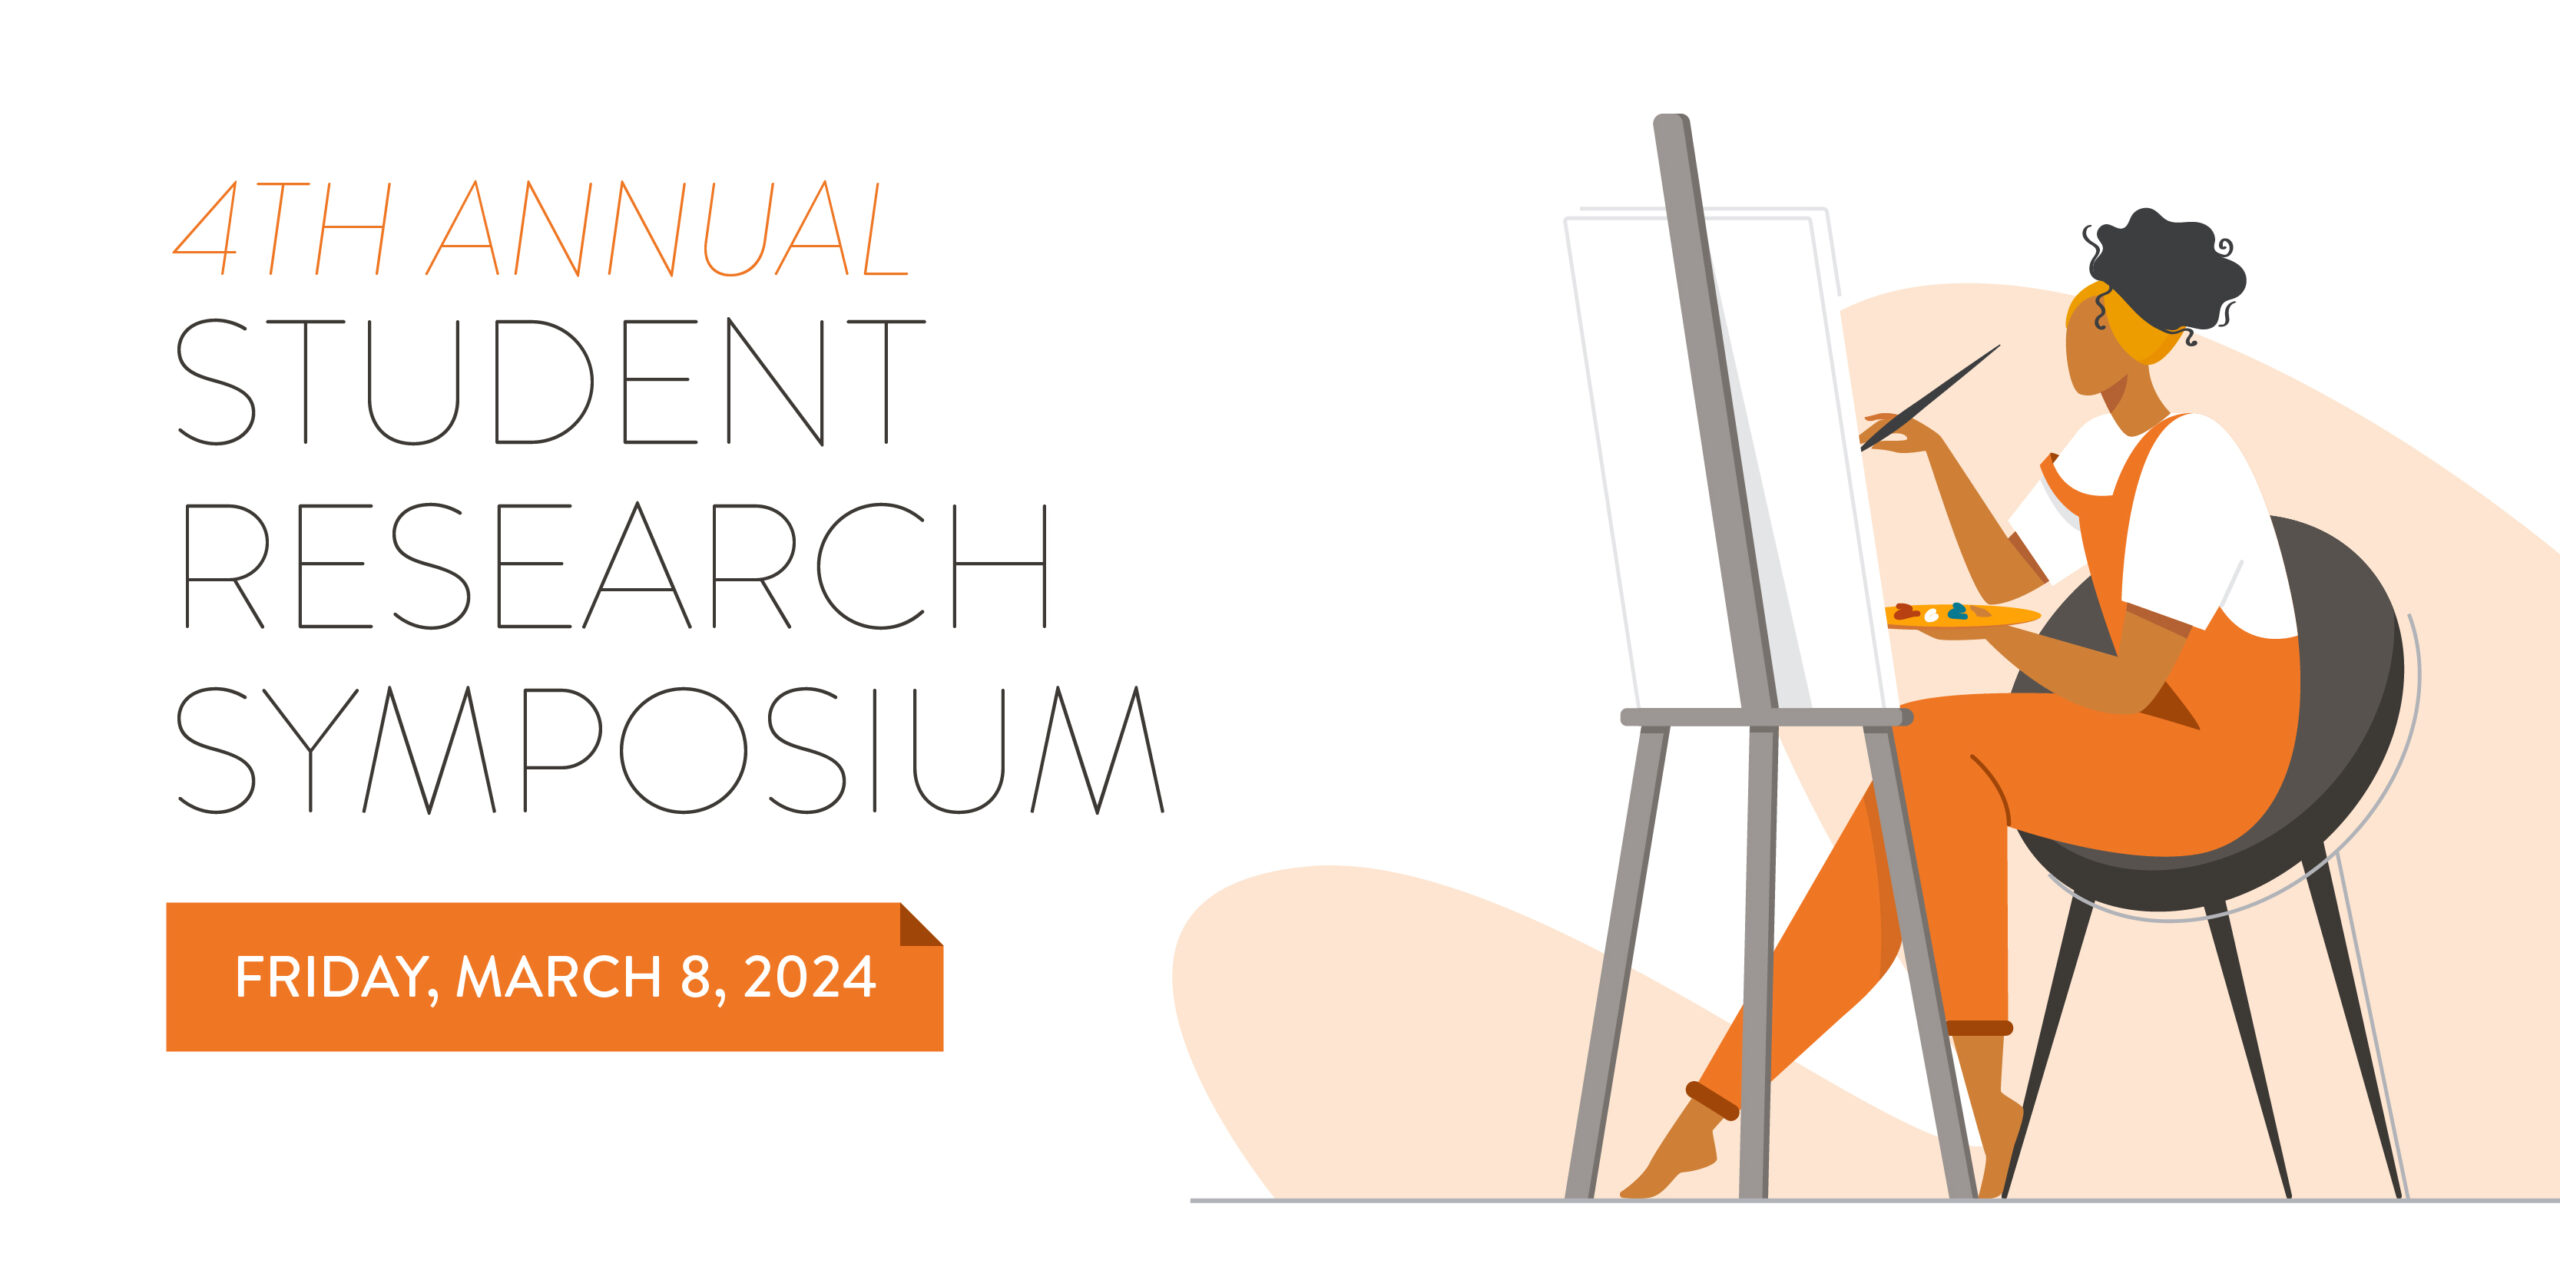 4th Annual Student Research Symposium